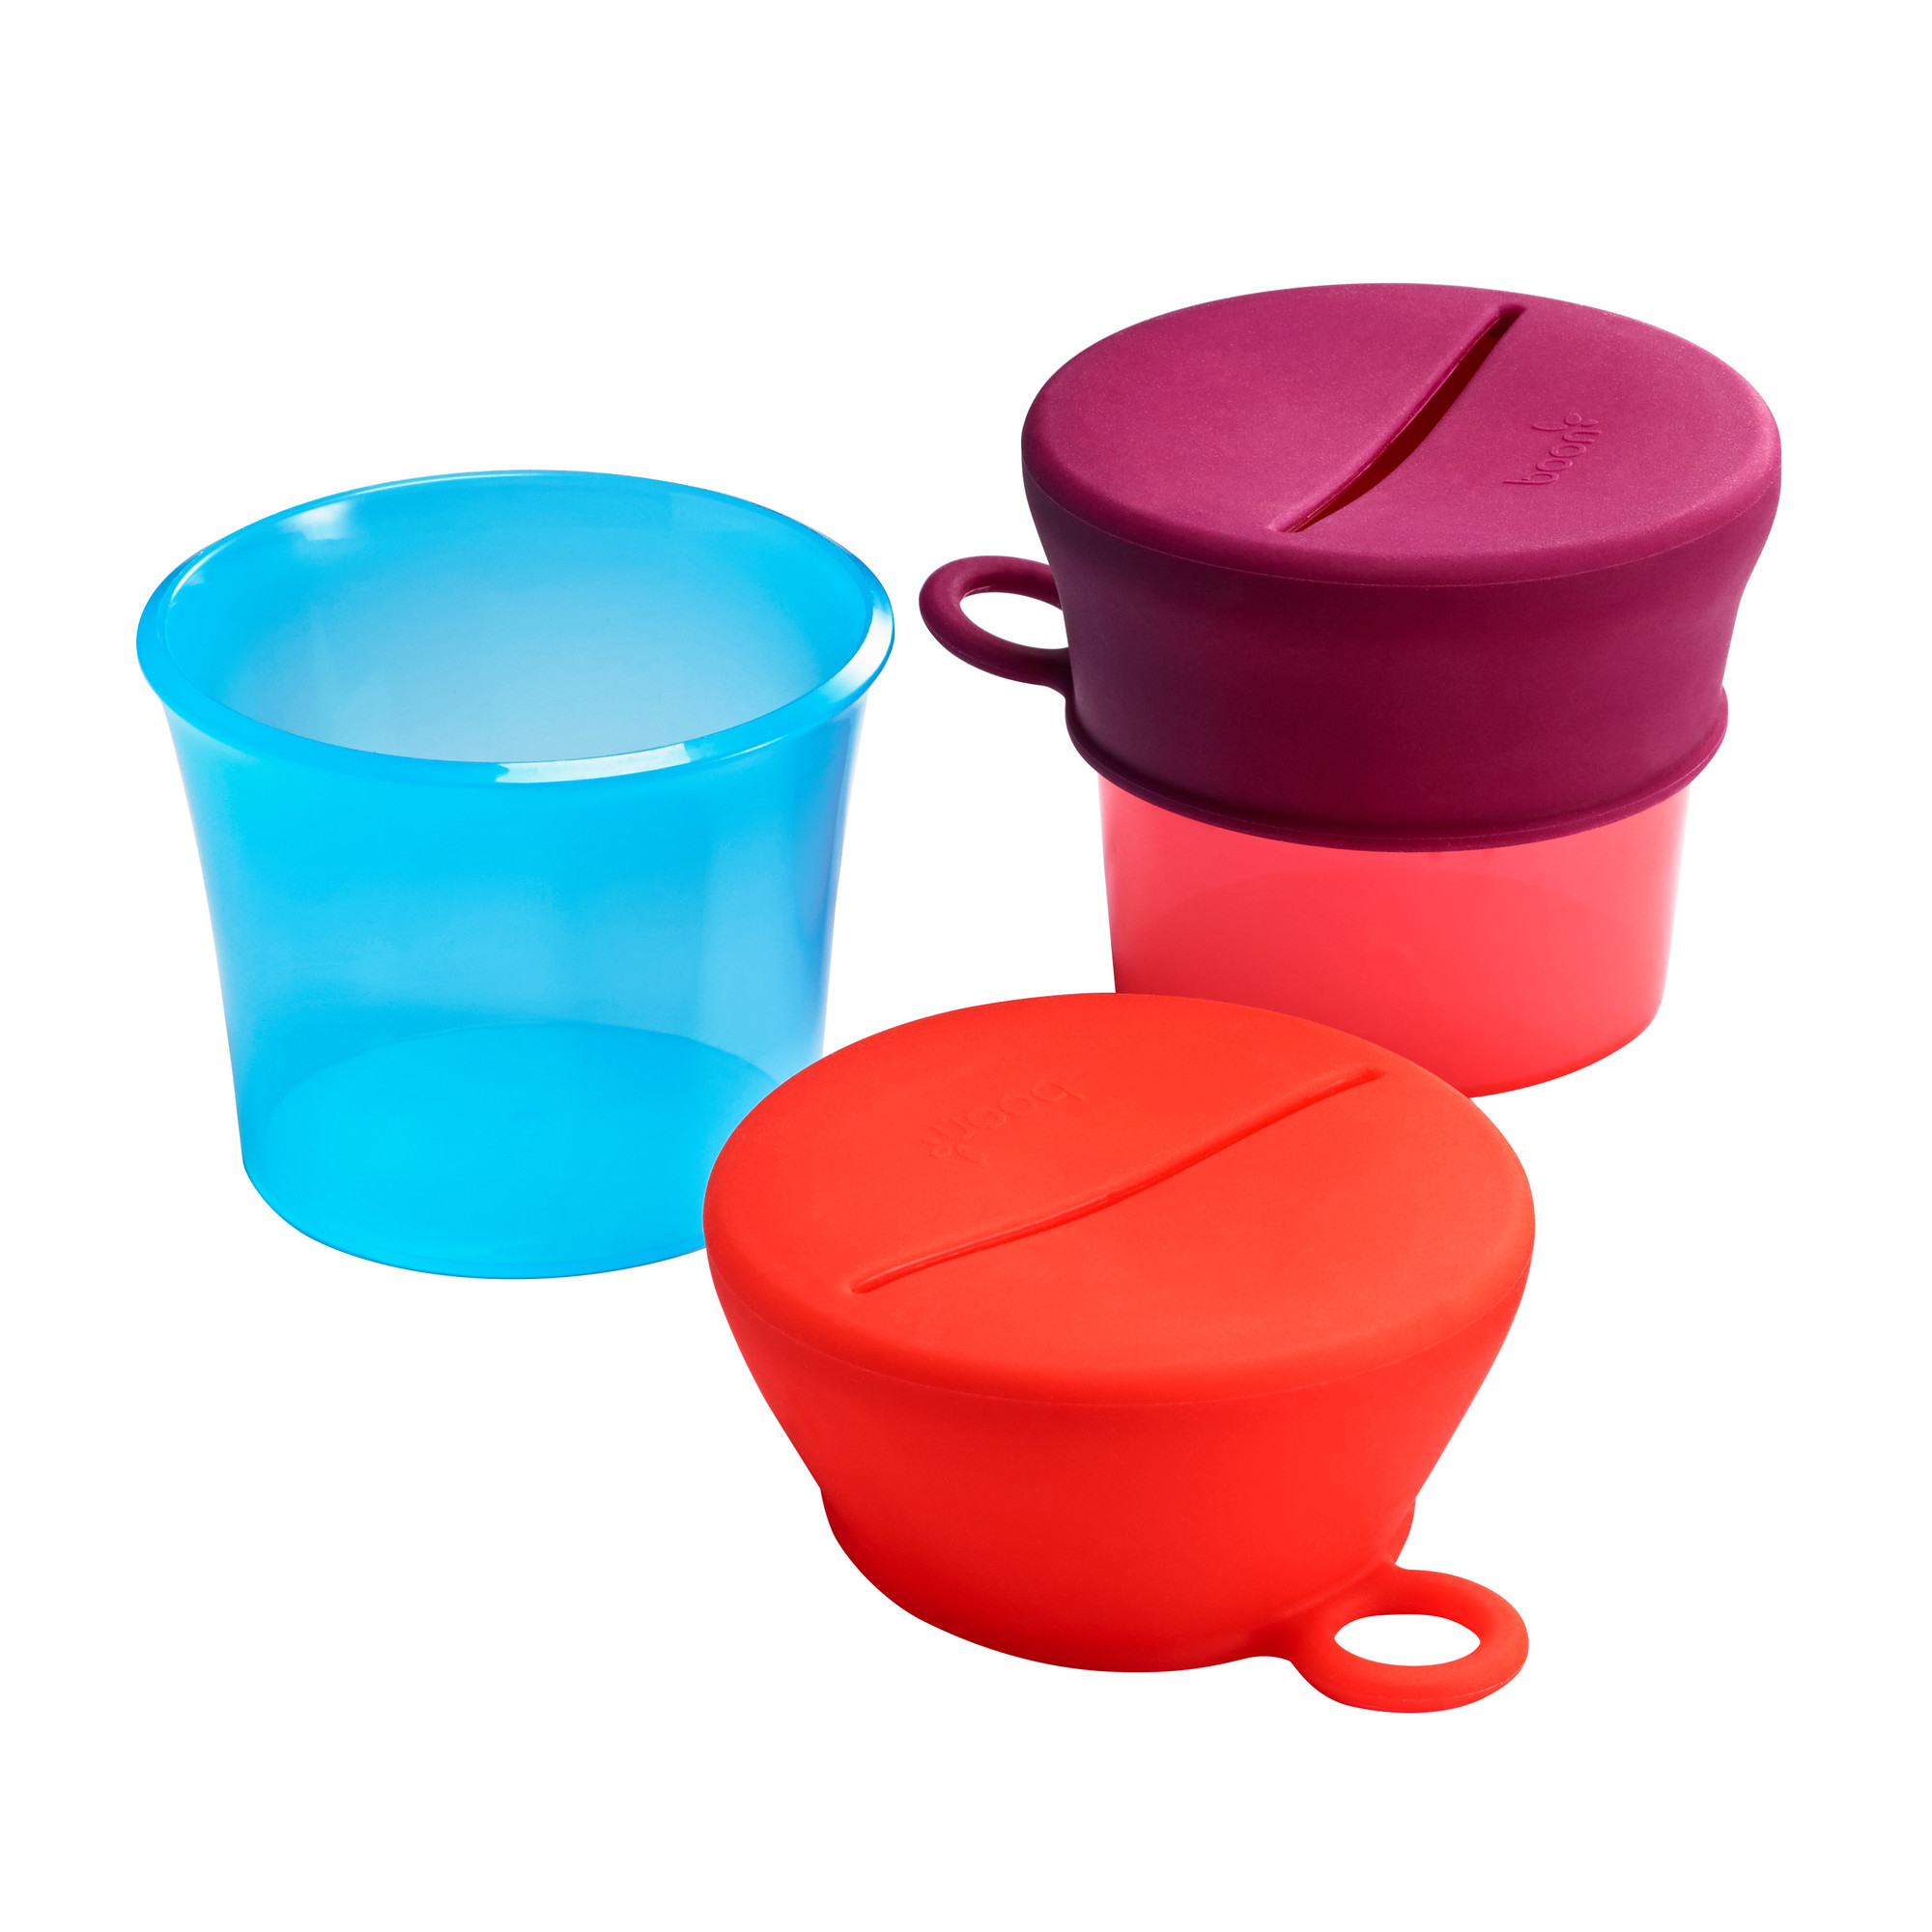 SNUG Snack Containers With Stretchy Silicone Lids -Girl